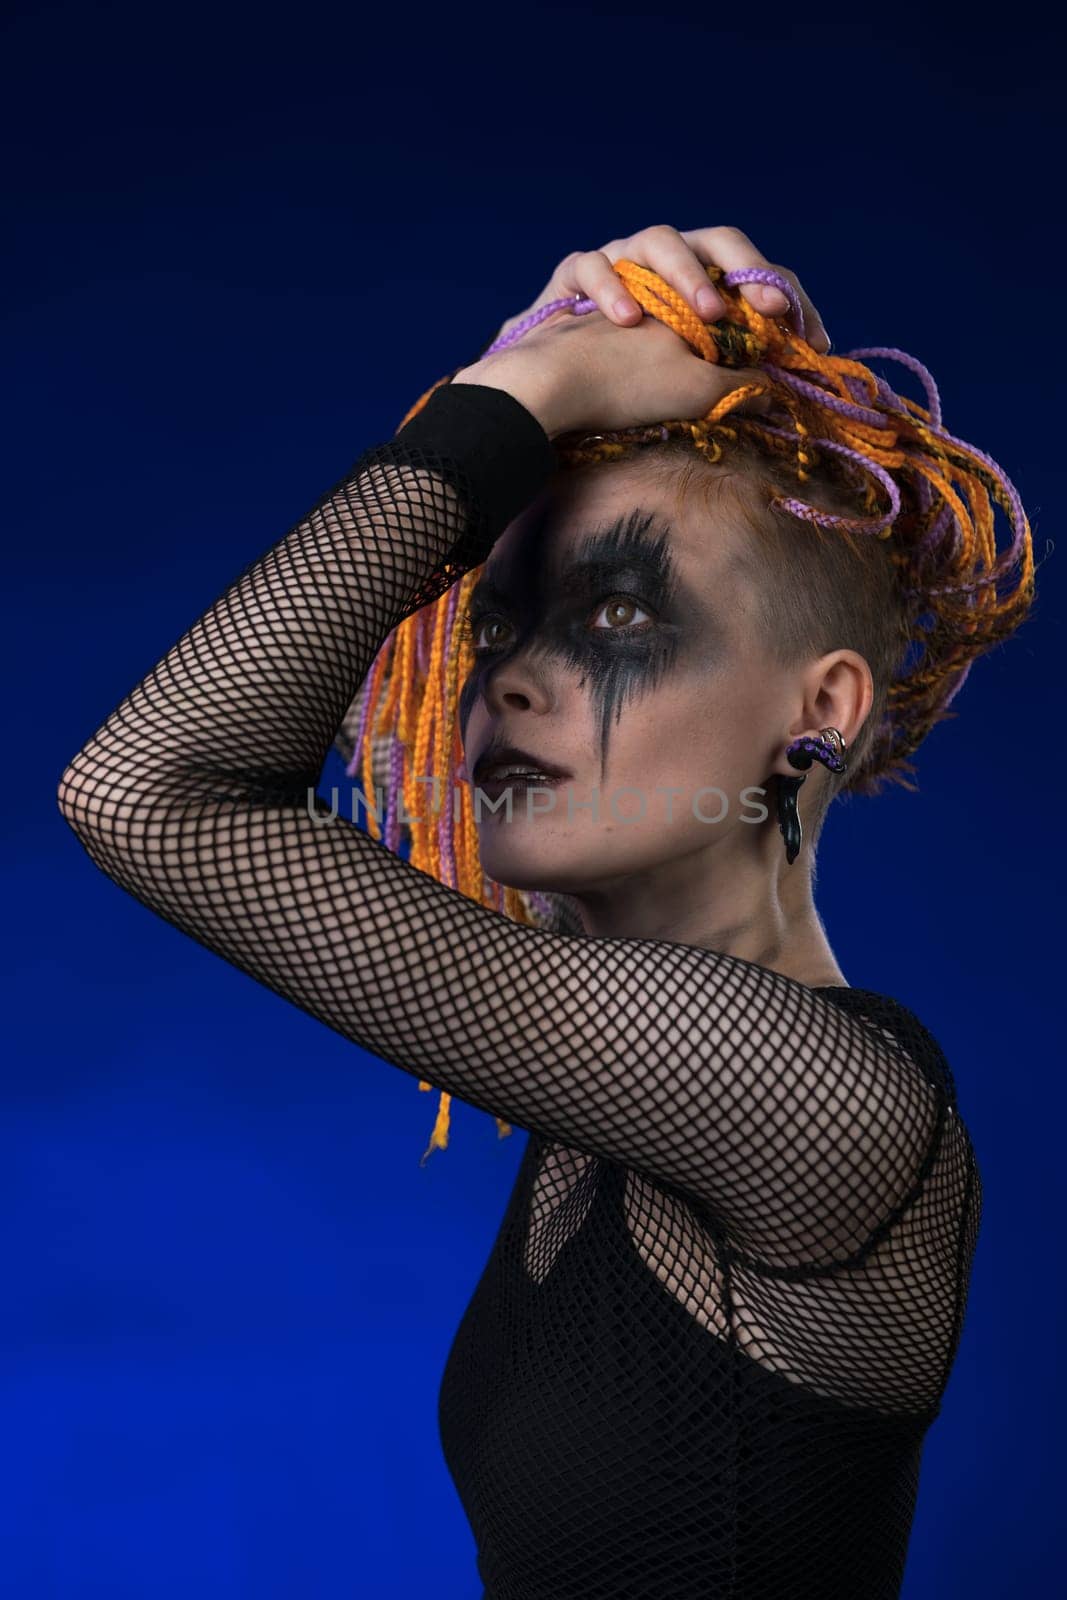 Shy young female with orange color braids hairdo and horror black stage makeup painted on face. Studio shot on blue background. Part of photo series